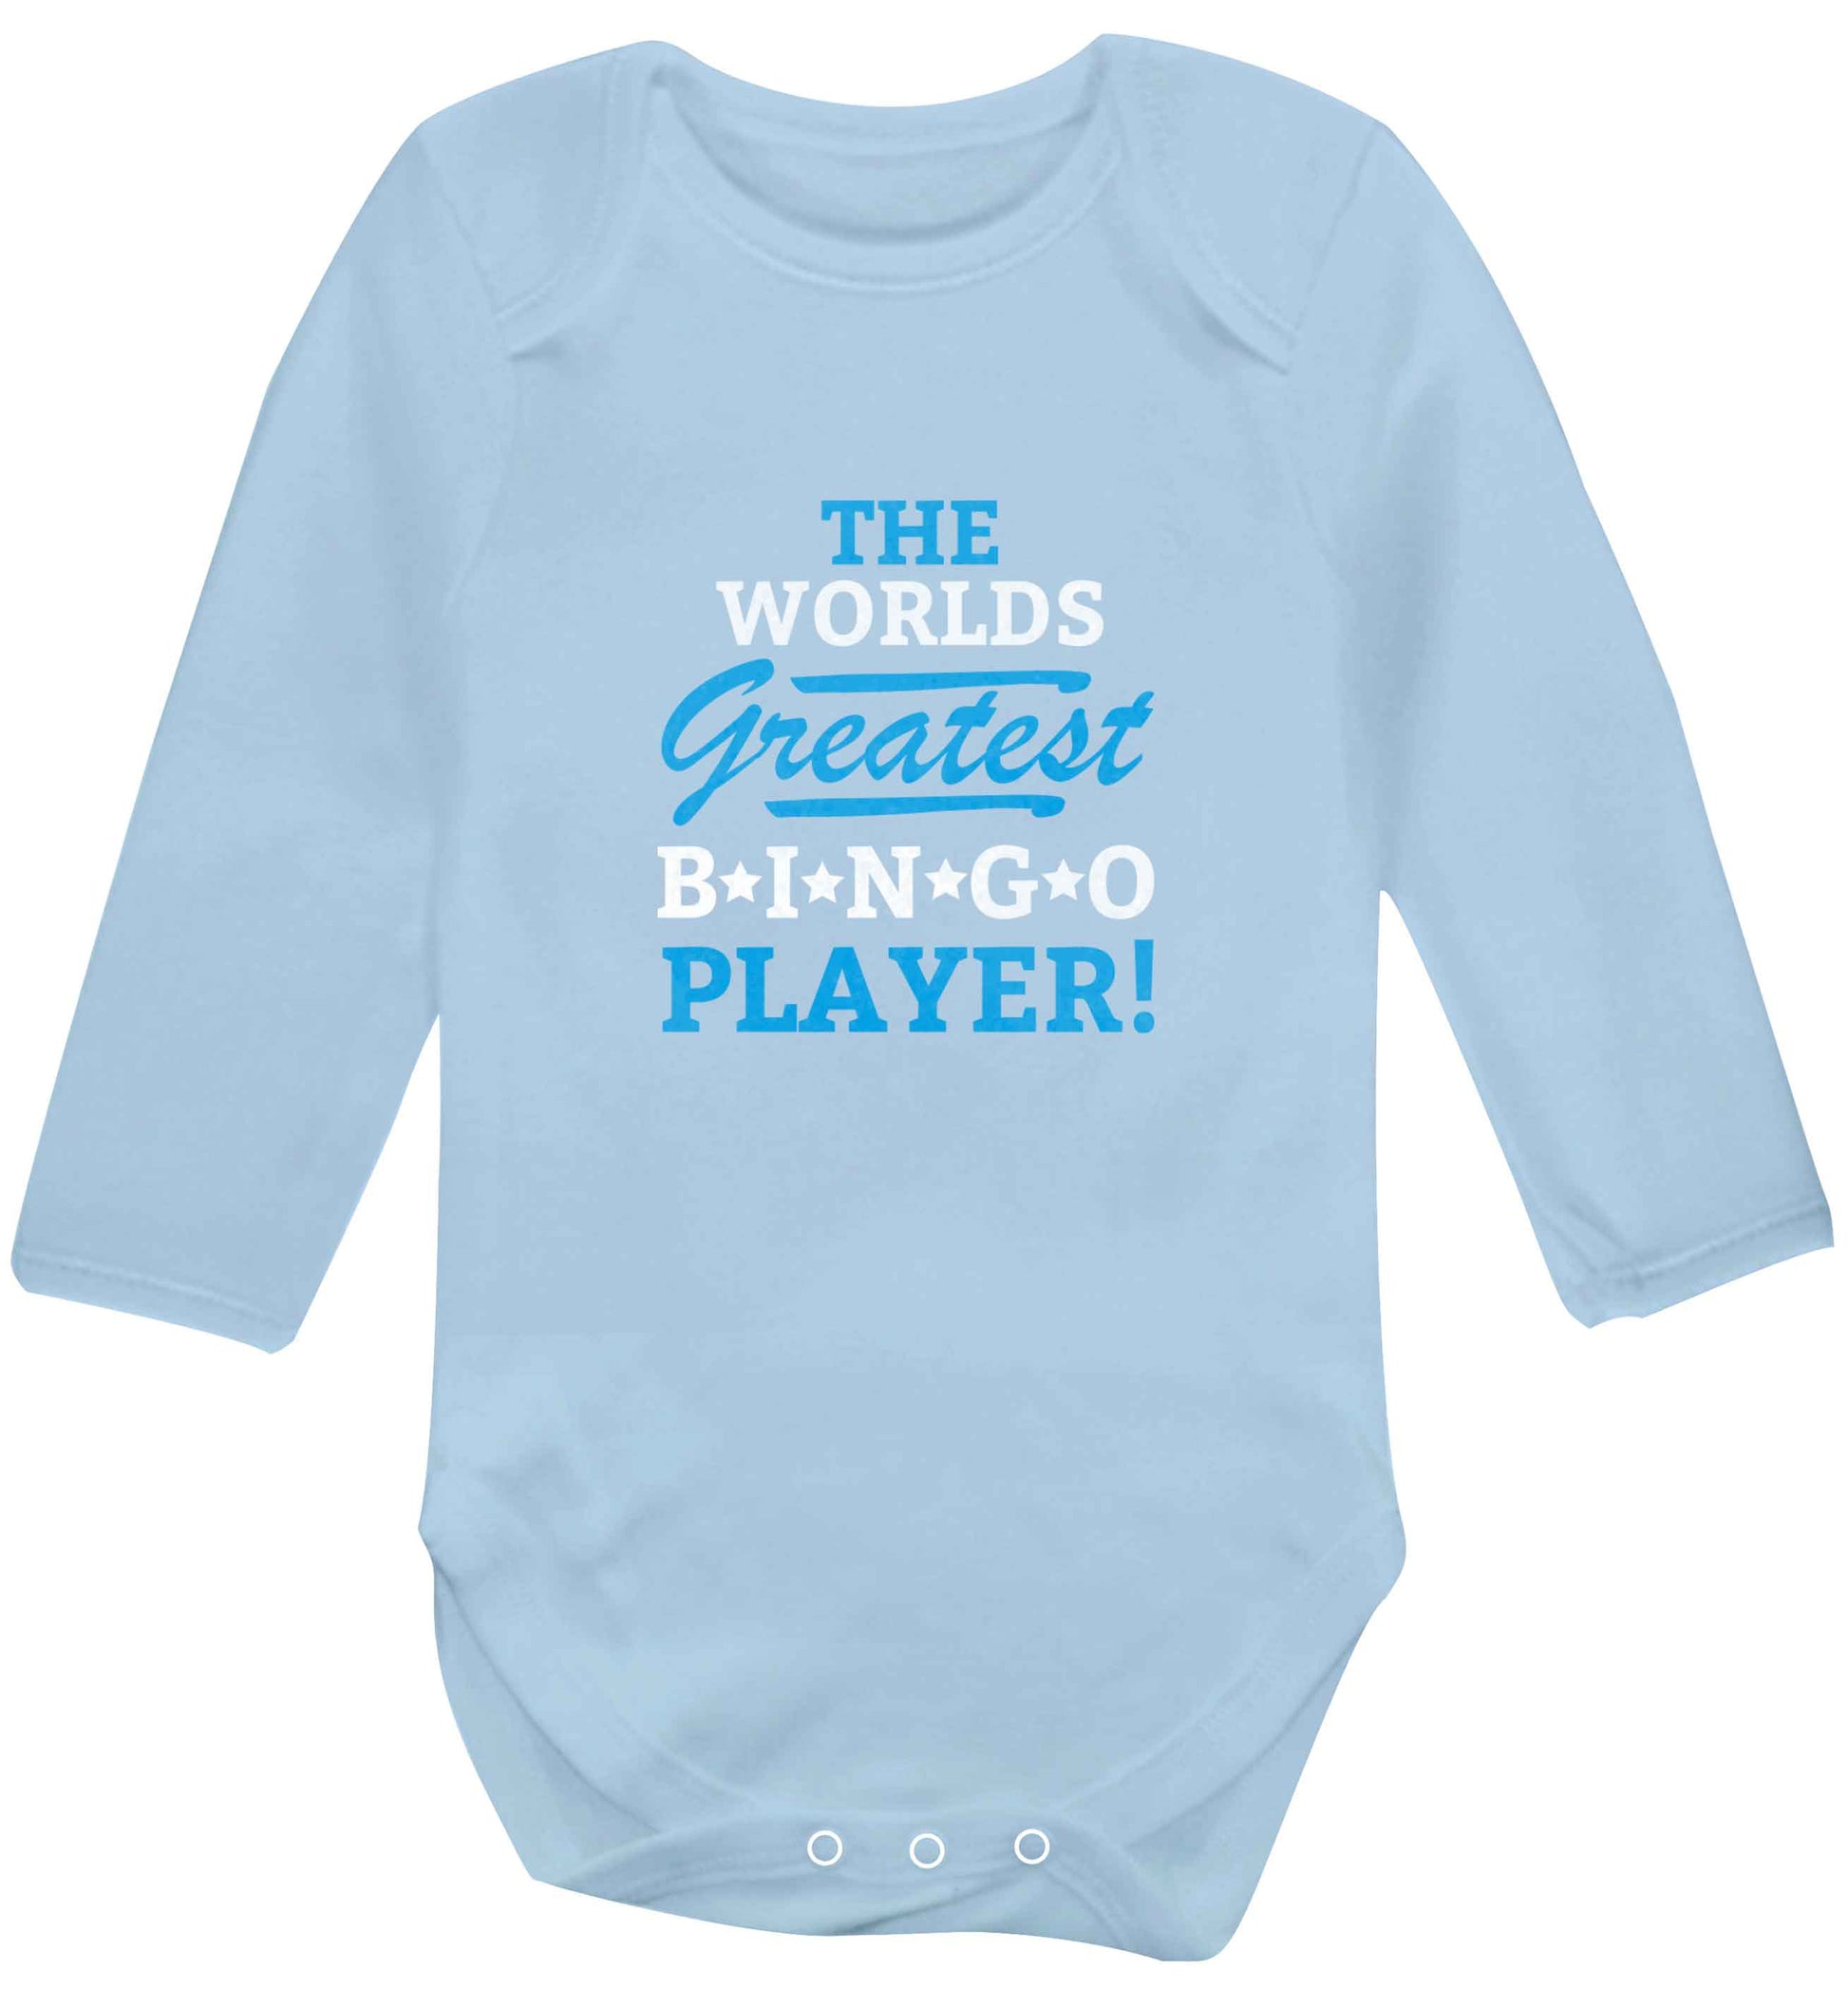 Worlds greatest bingo player baby vest long sleeved pale blue 6-12 months